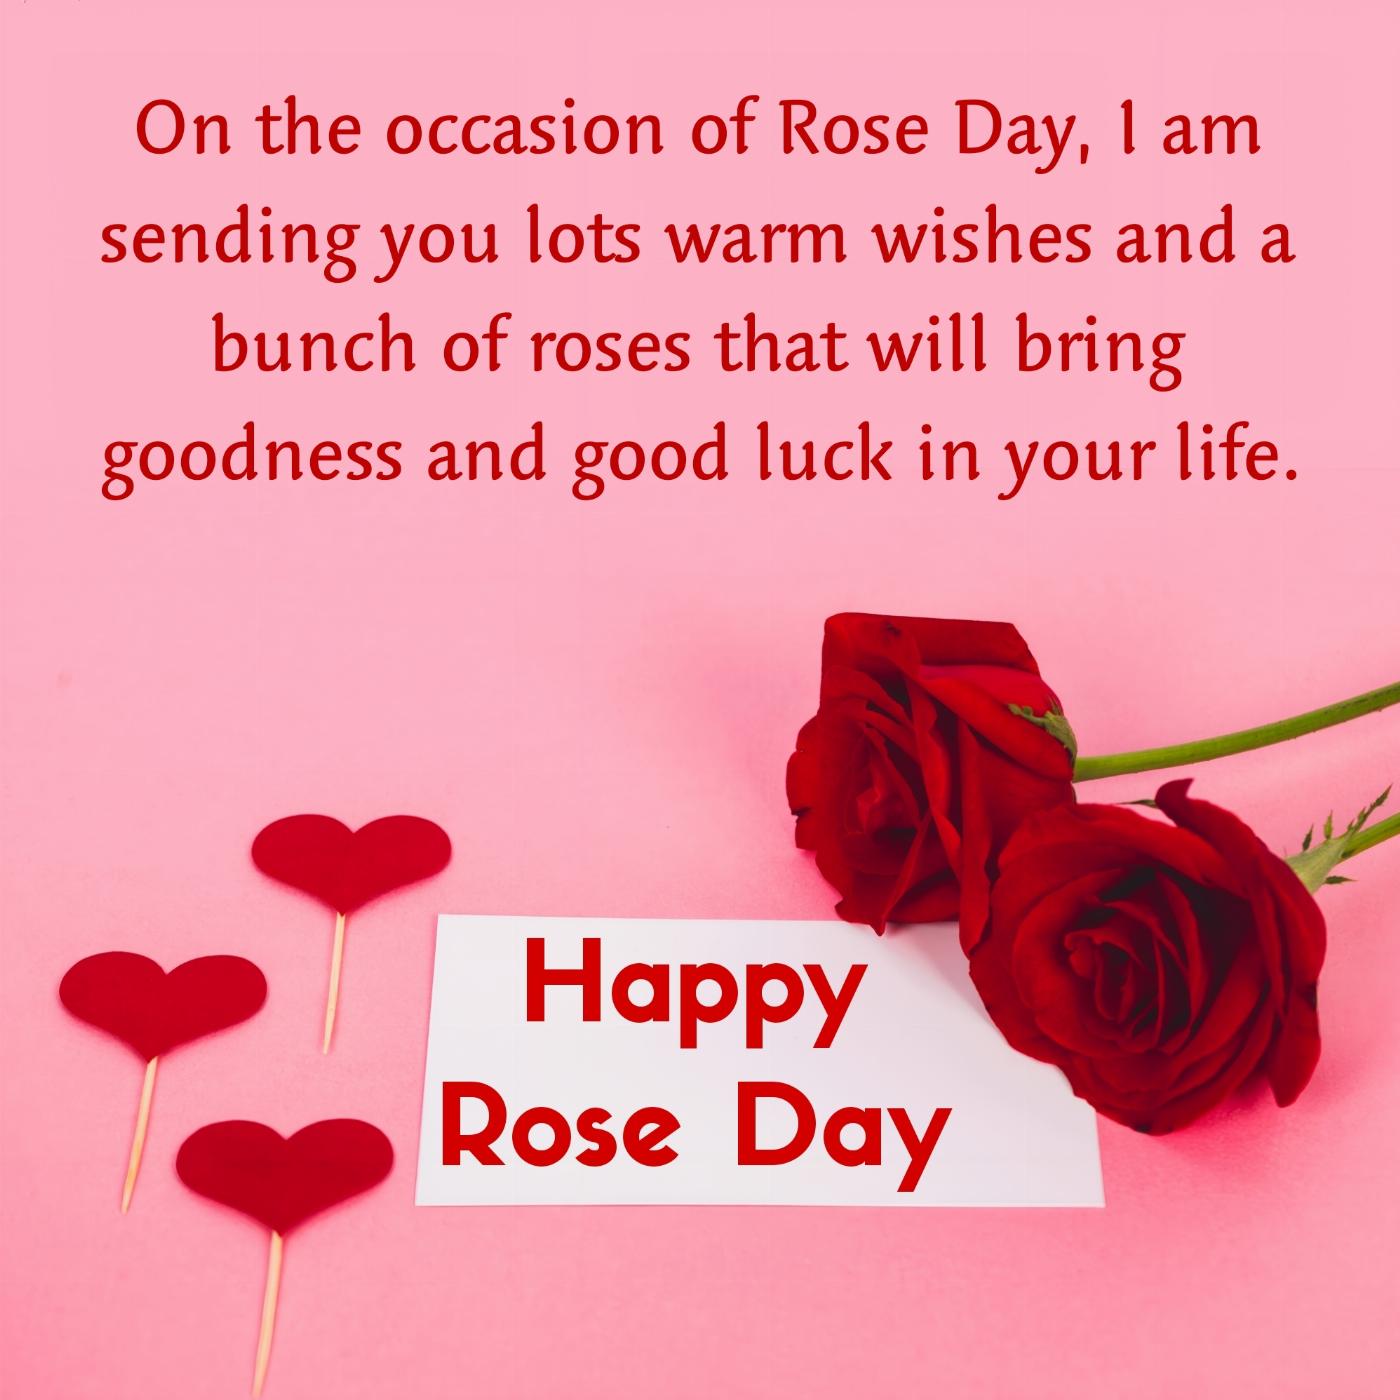 On the occasion of Rose Day I am sending you lots warm wishes